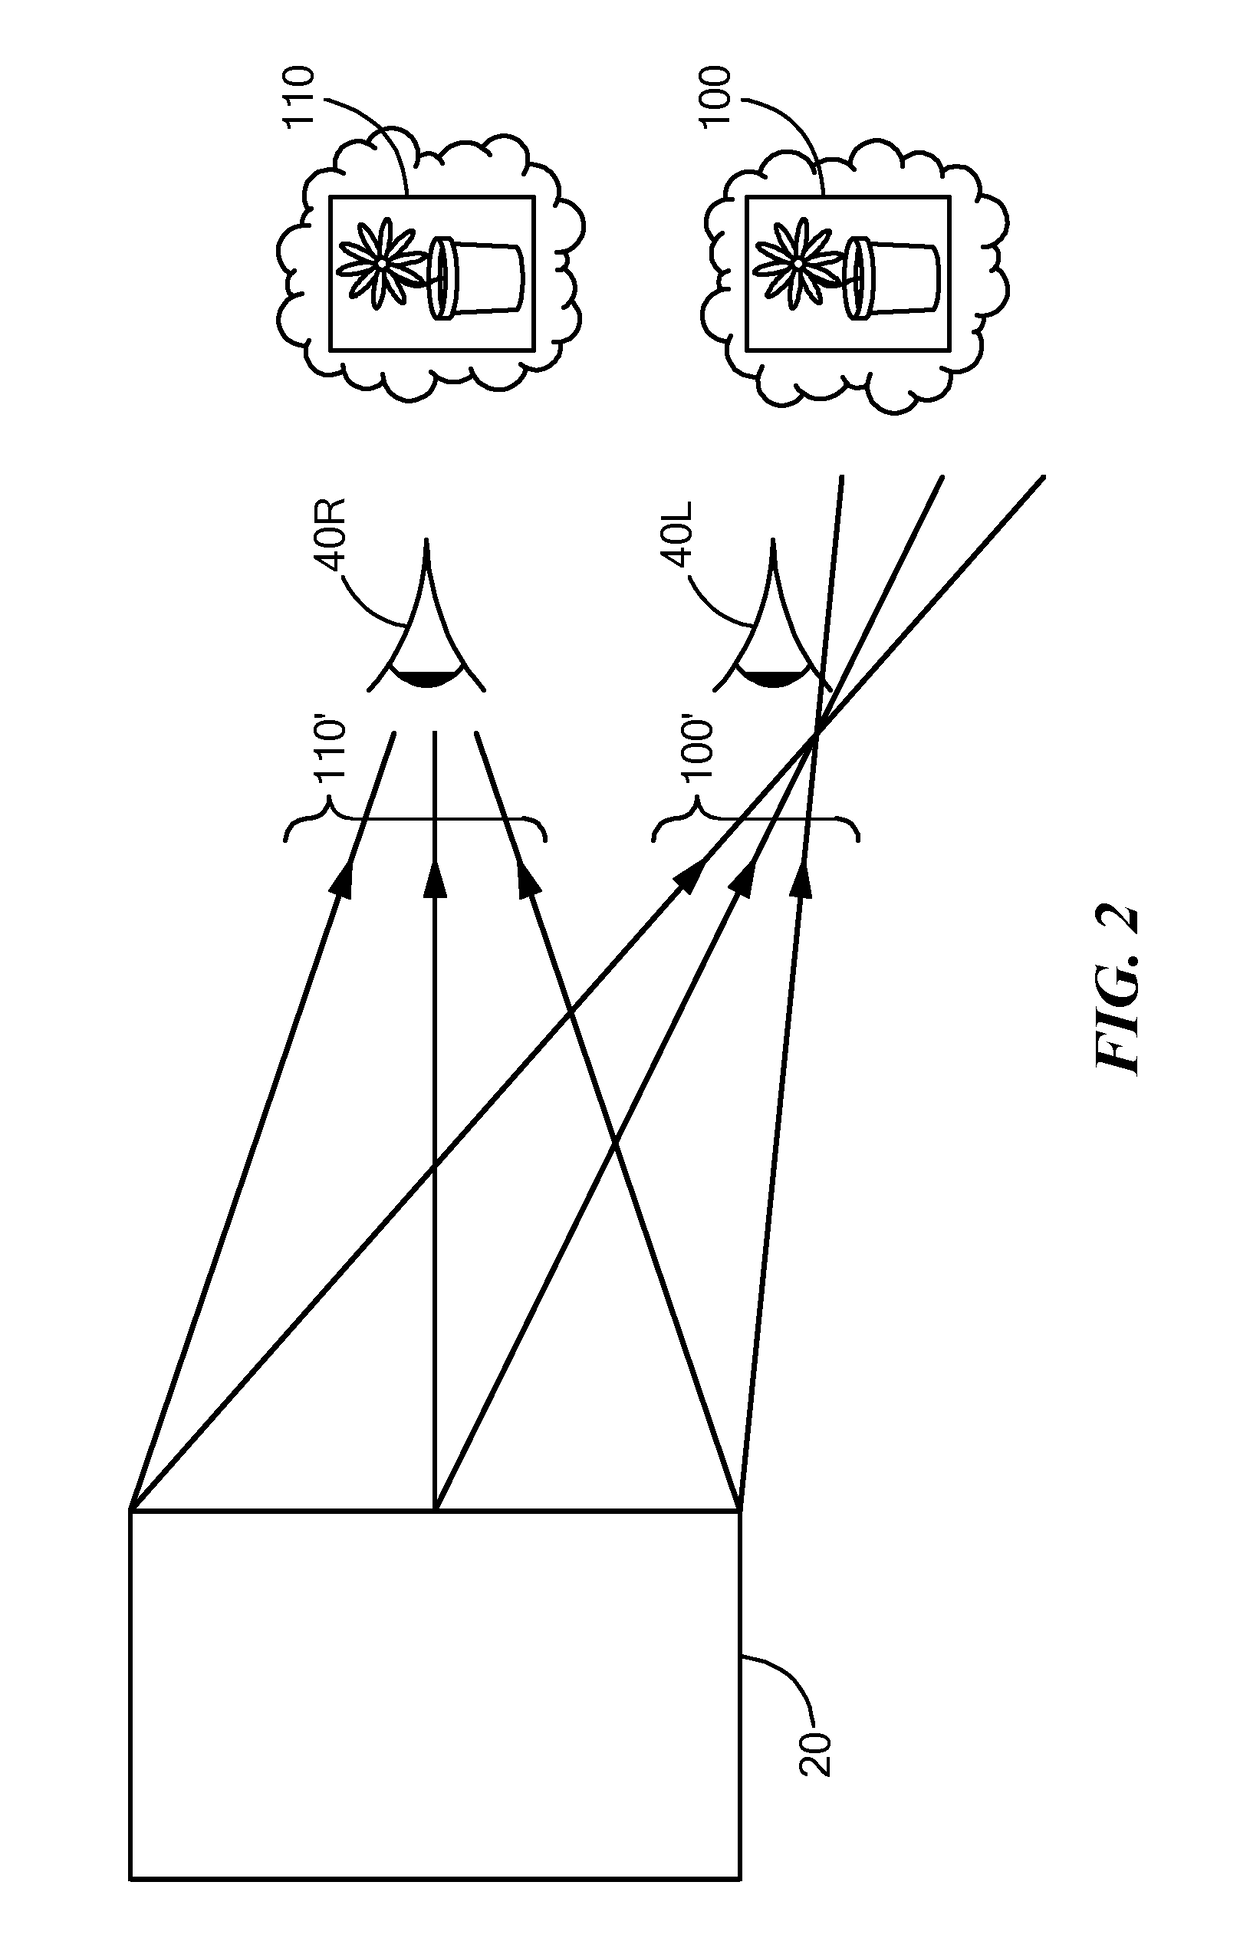 Method and Apparatus for Light Field Generation